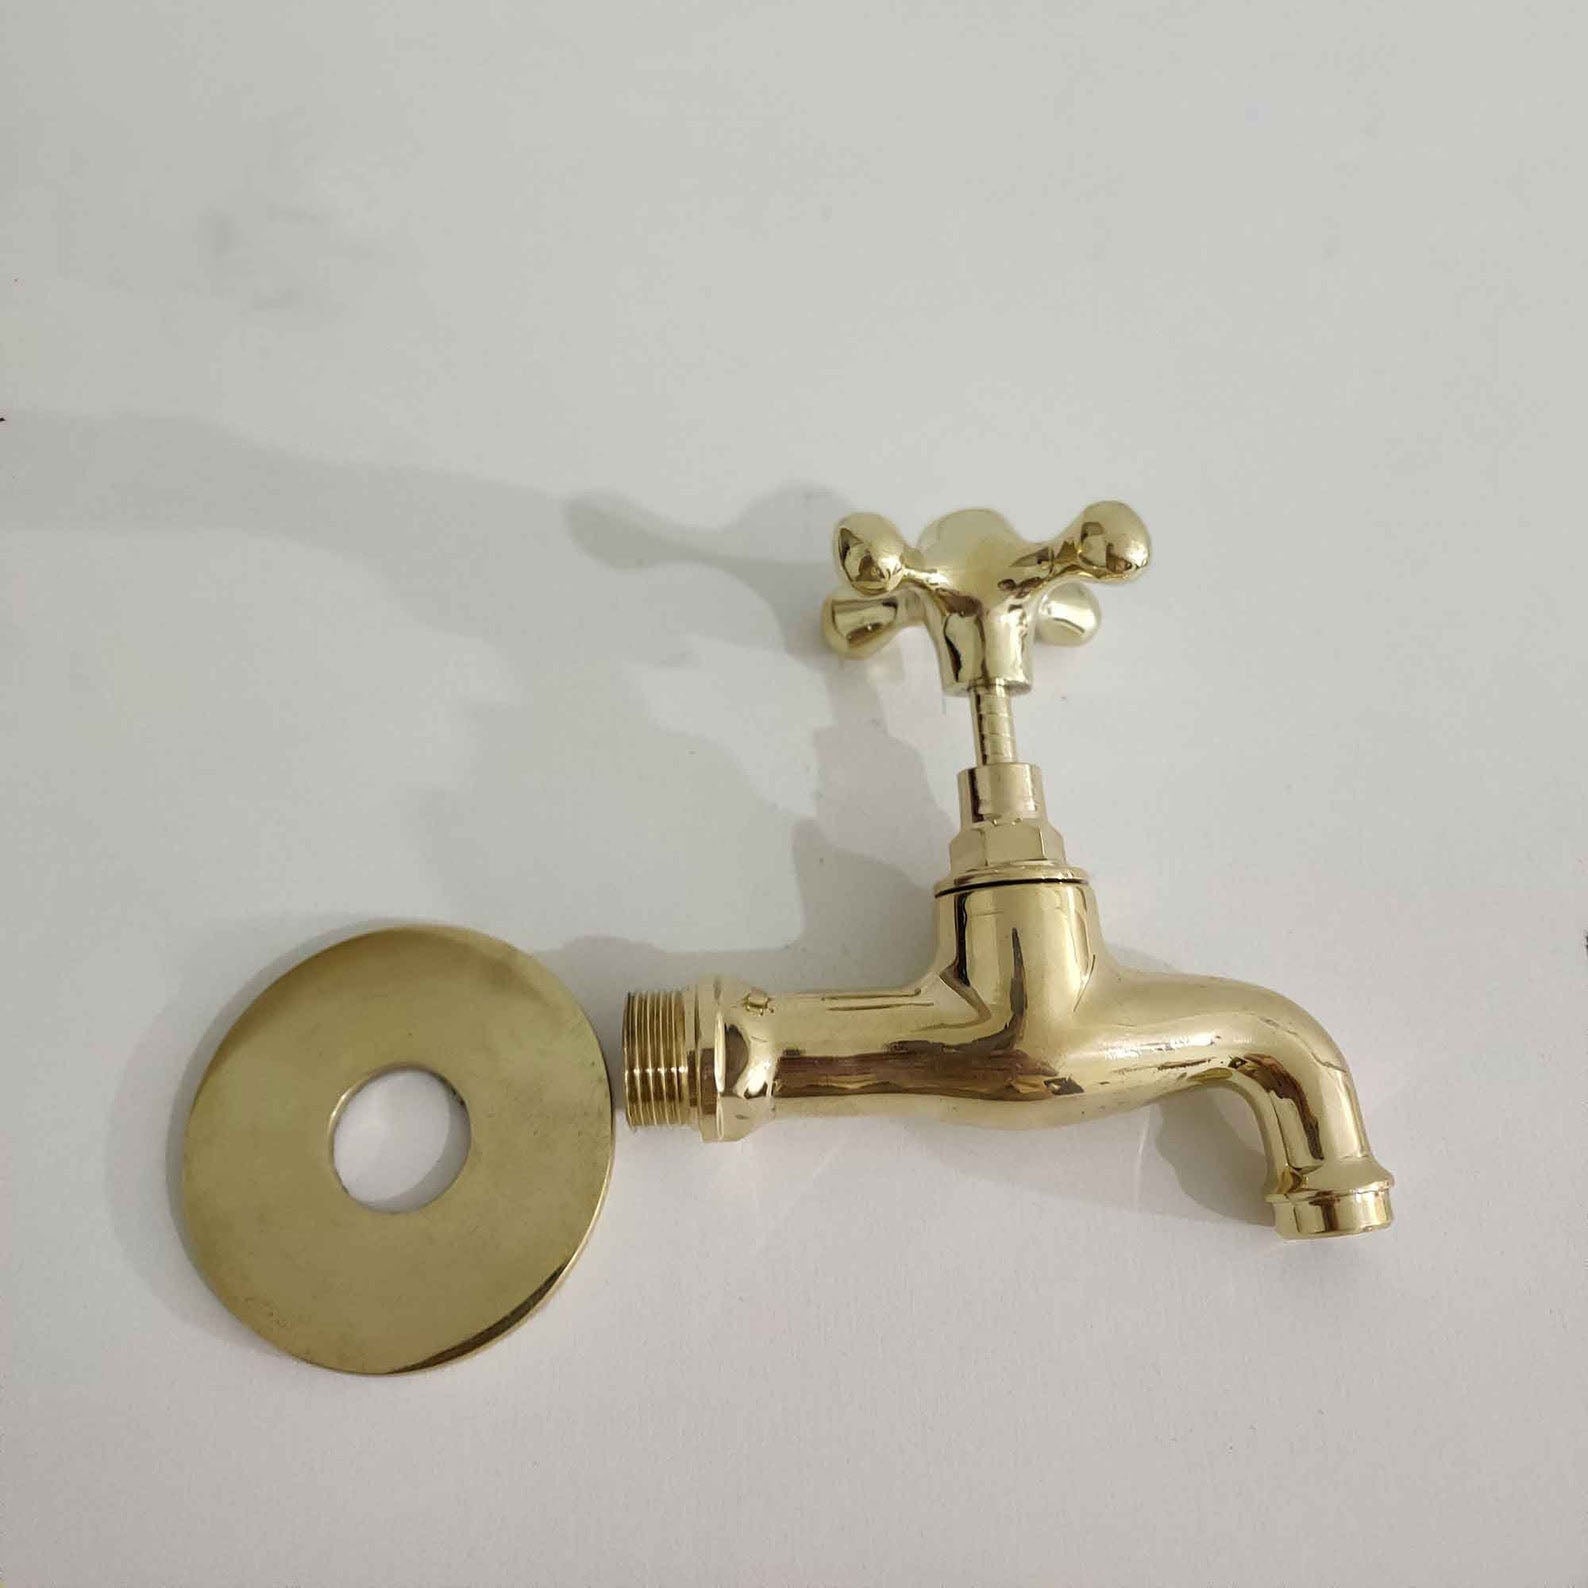 Single Hole Faucet - Brass Wall Mounted Faucet - Bathroom Faucets